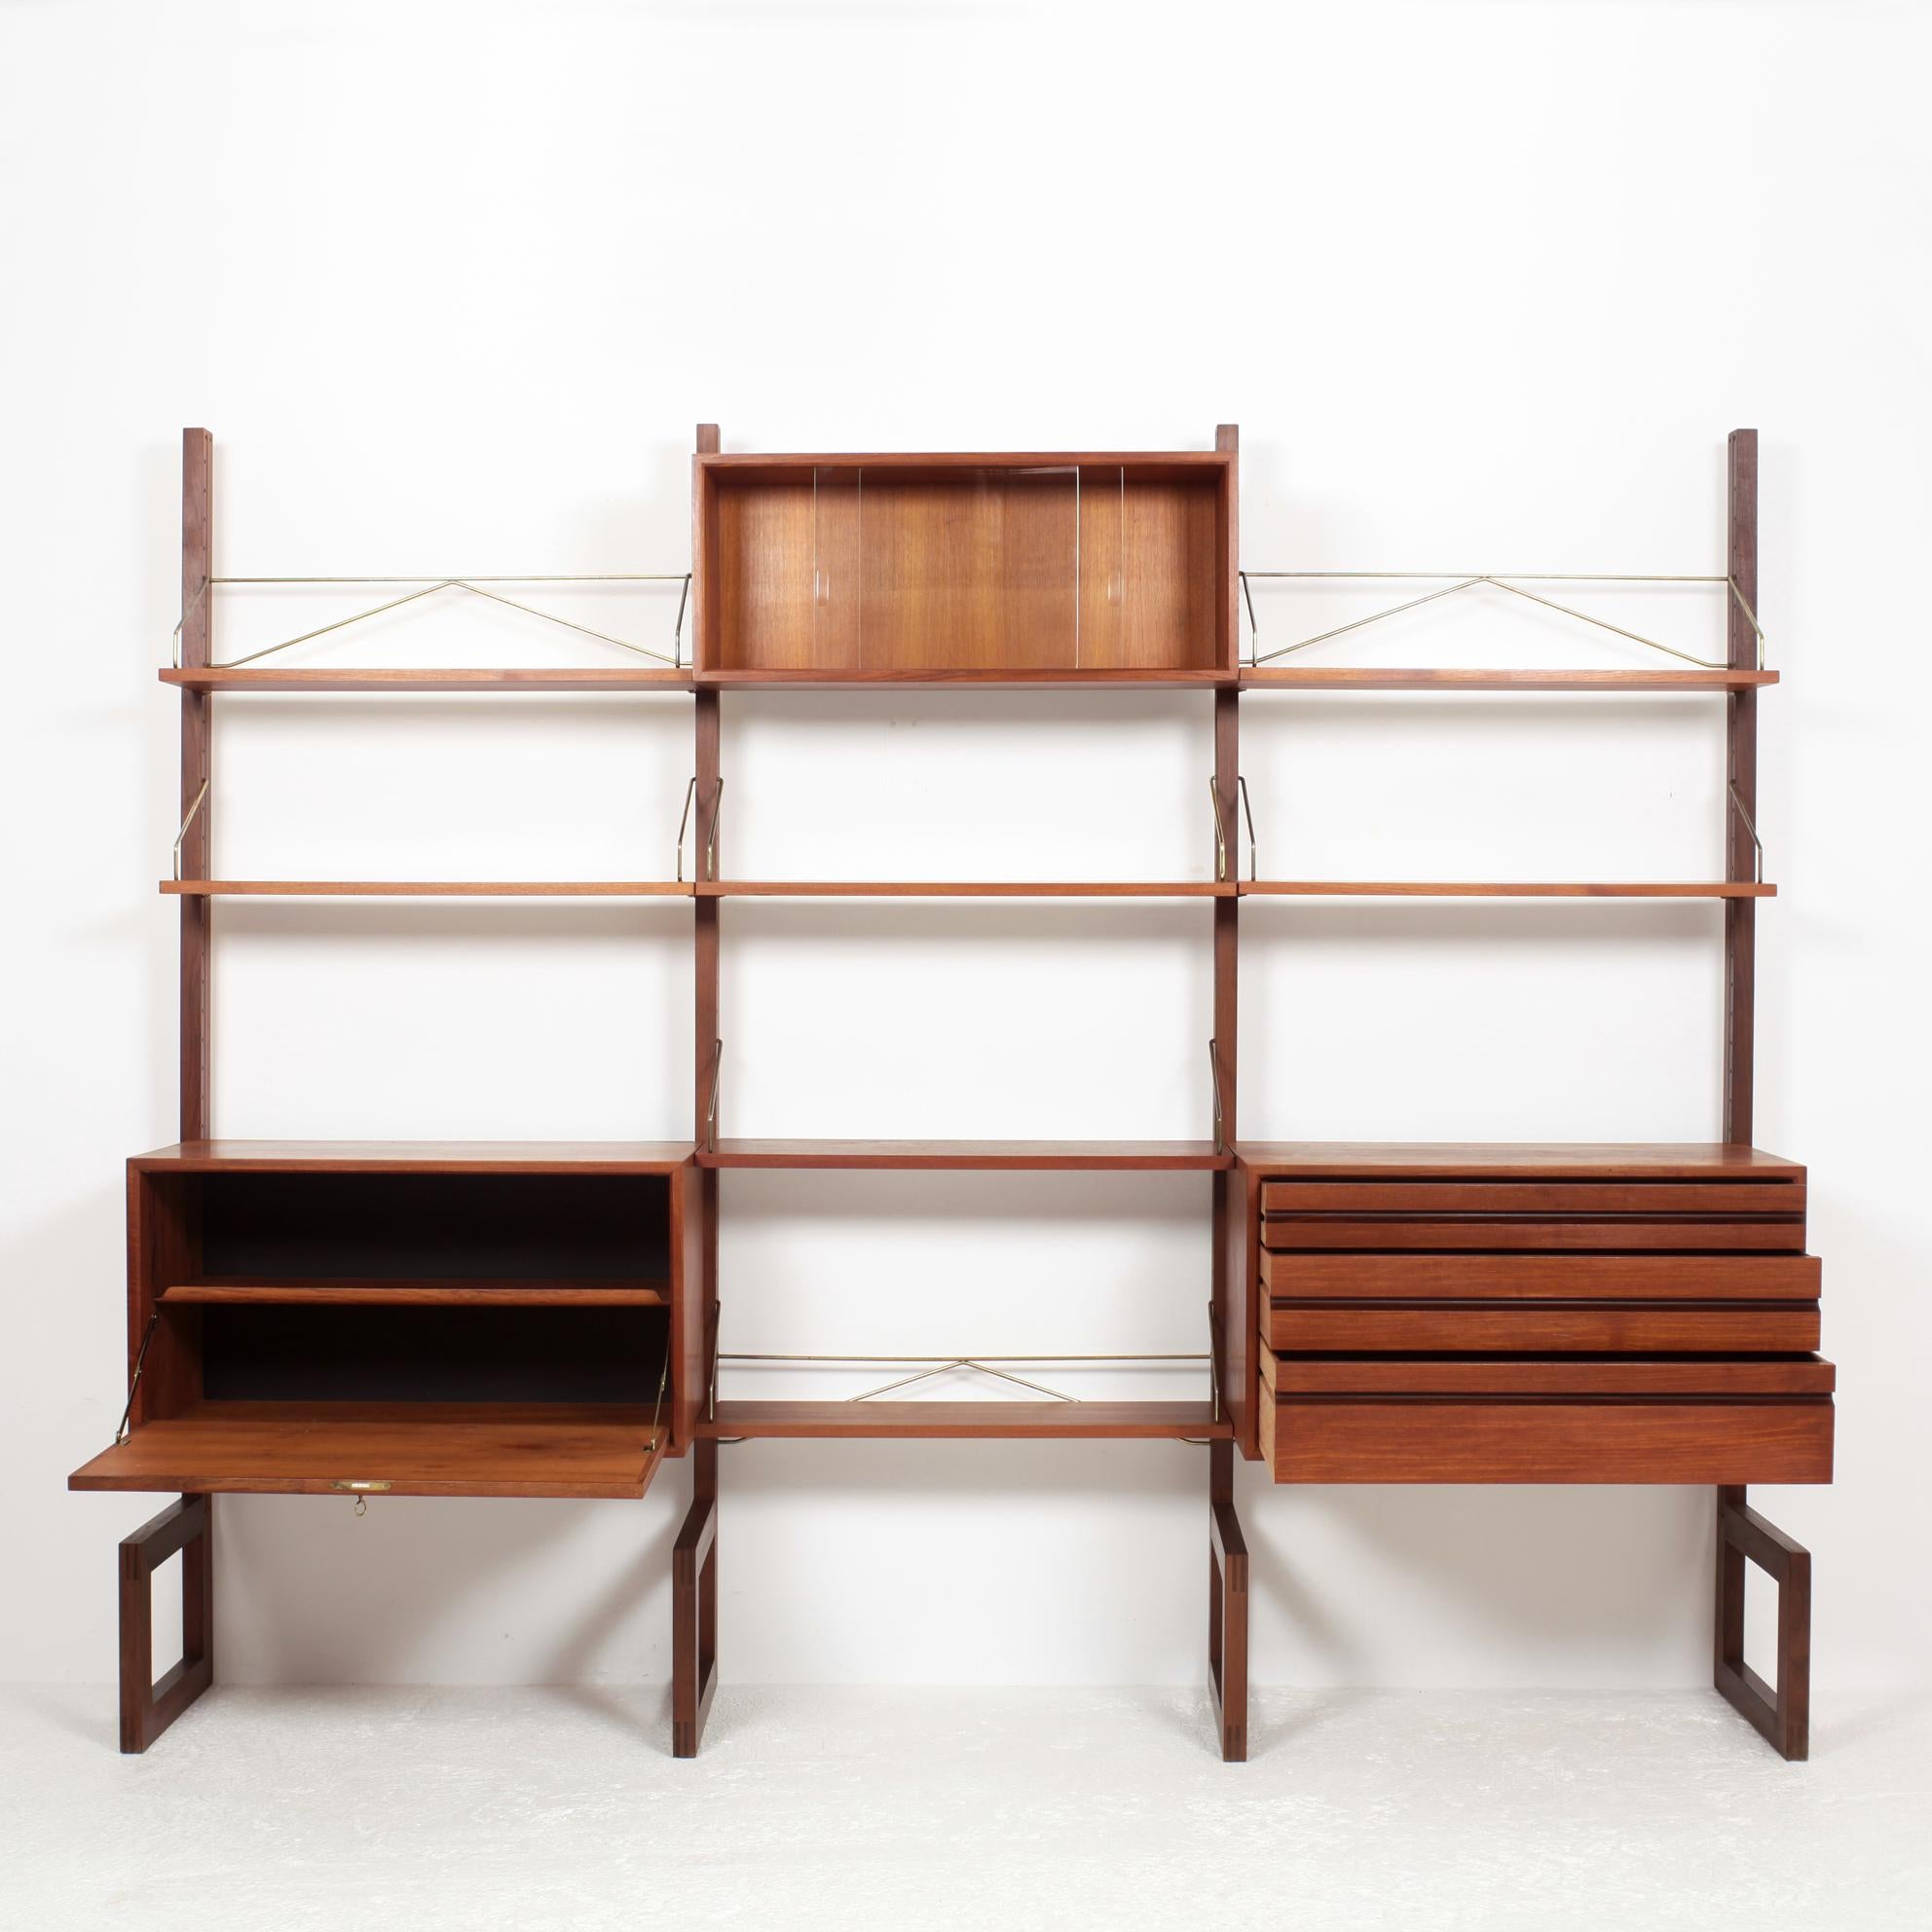 Modular shelves designed by Poul Cadovius, Denmark, 1960
Teak and brass.
Some traces of use - restoration on the top of one box.